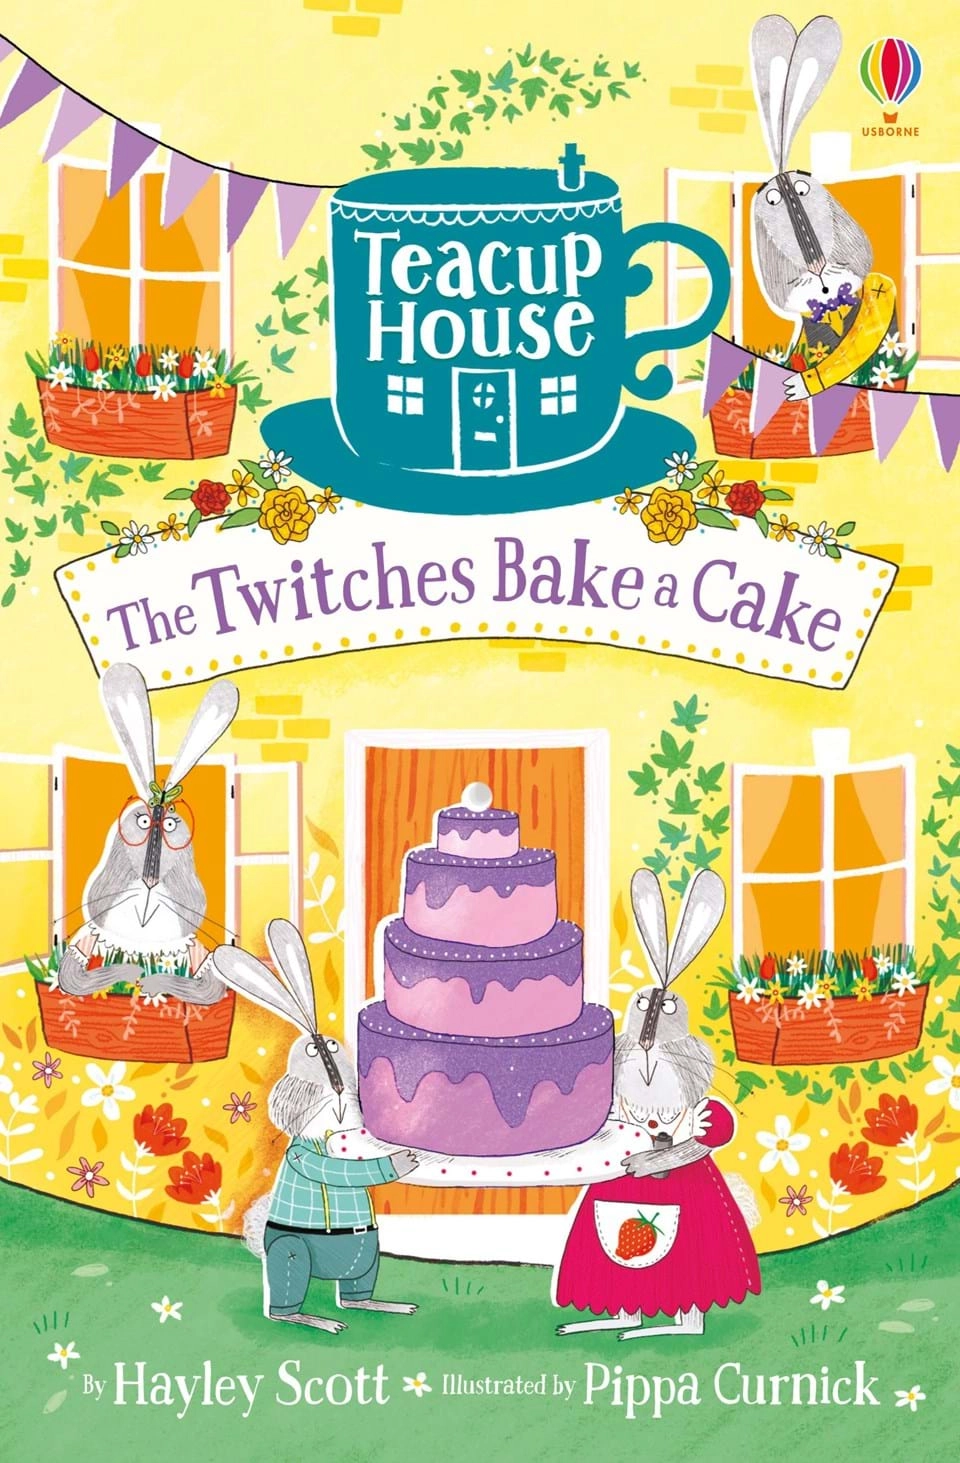 THE TWITCHES BAKE A CAKE